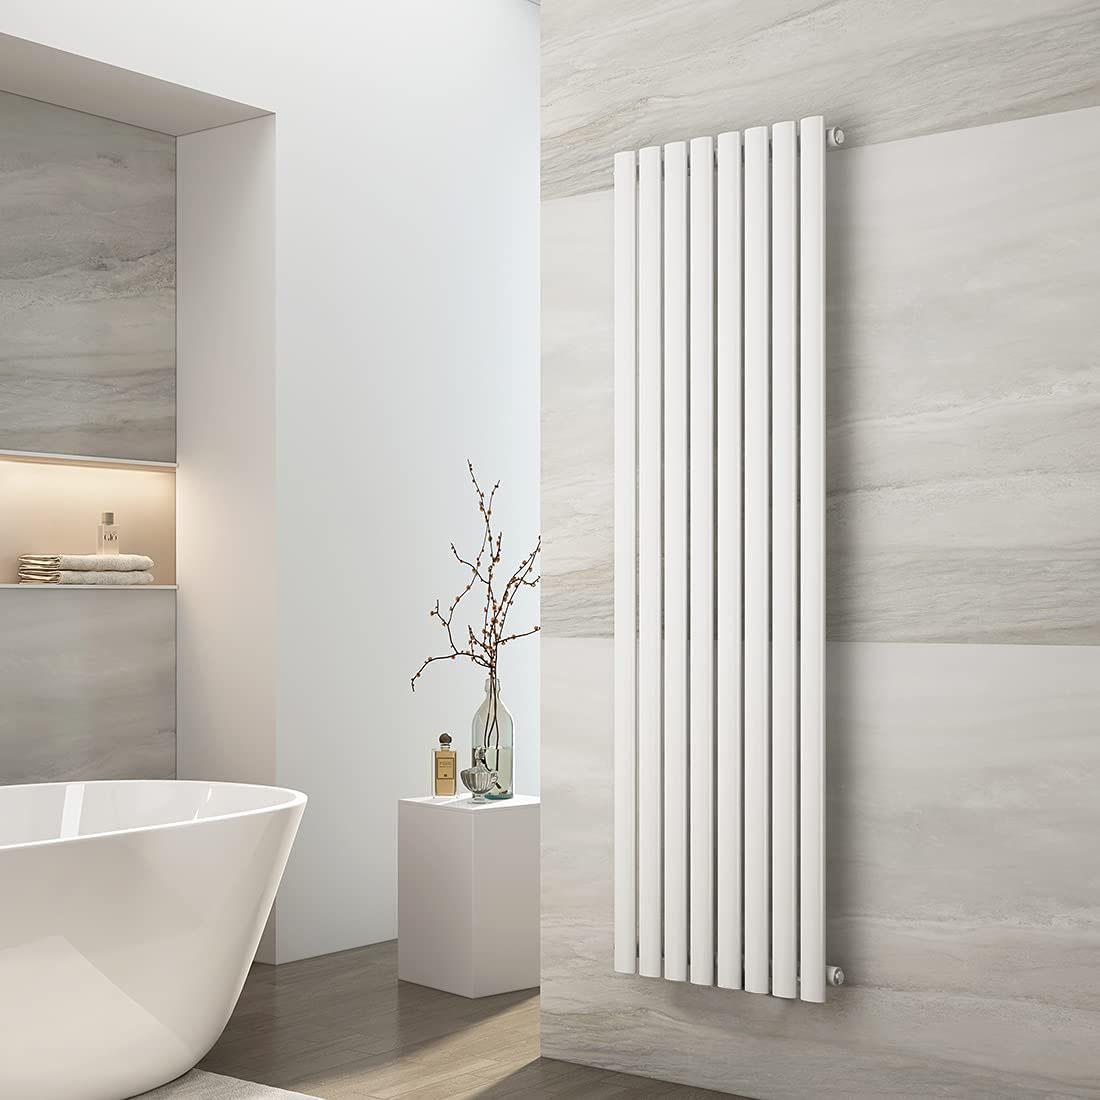 <b>Vertical radiator is the best choice for small spaces</b>